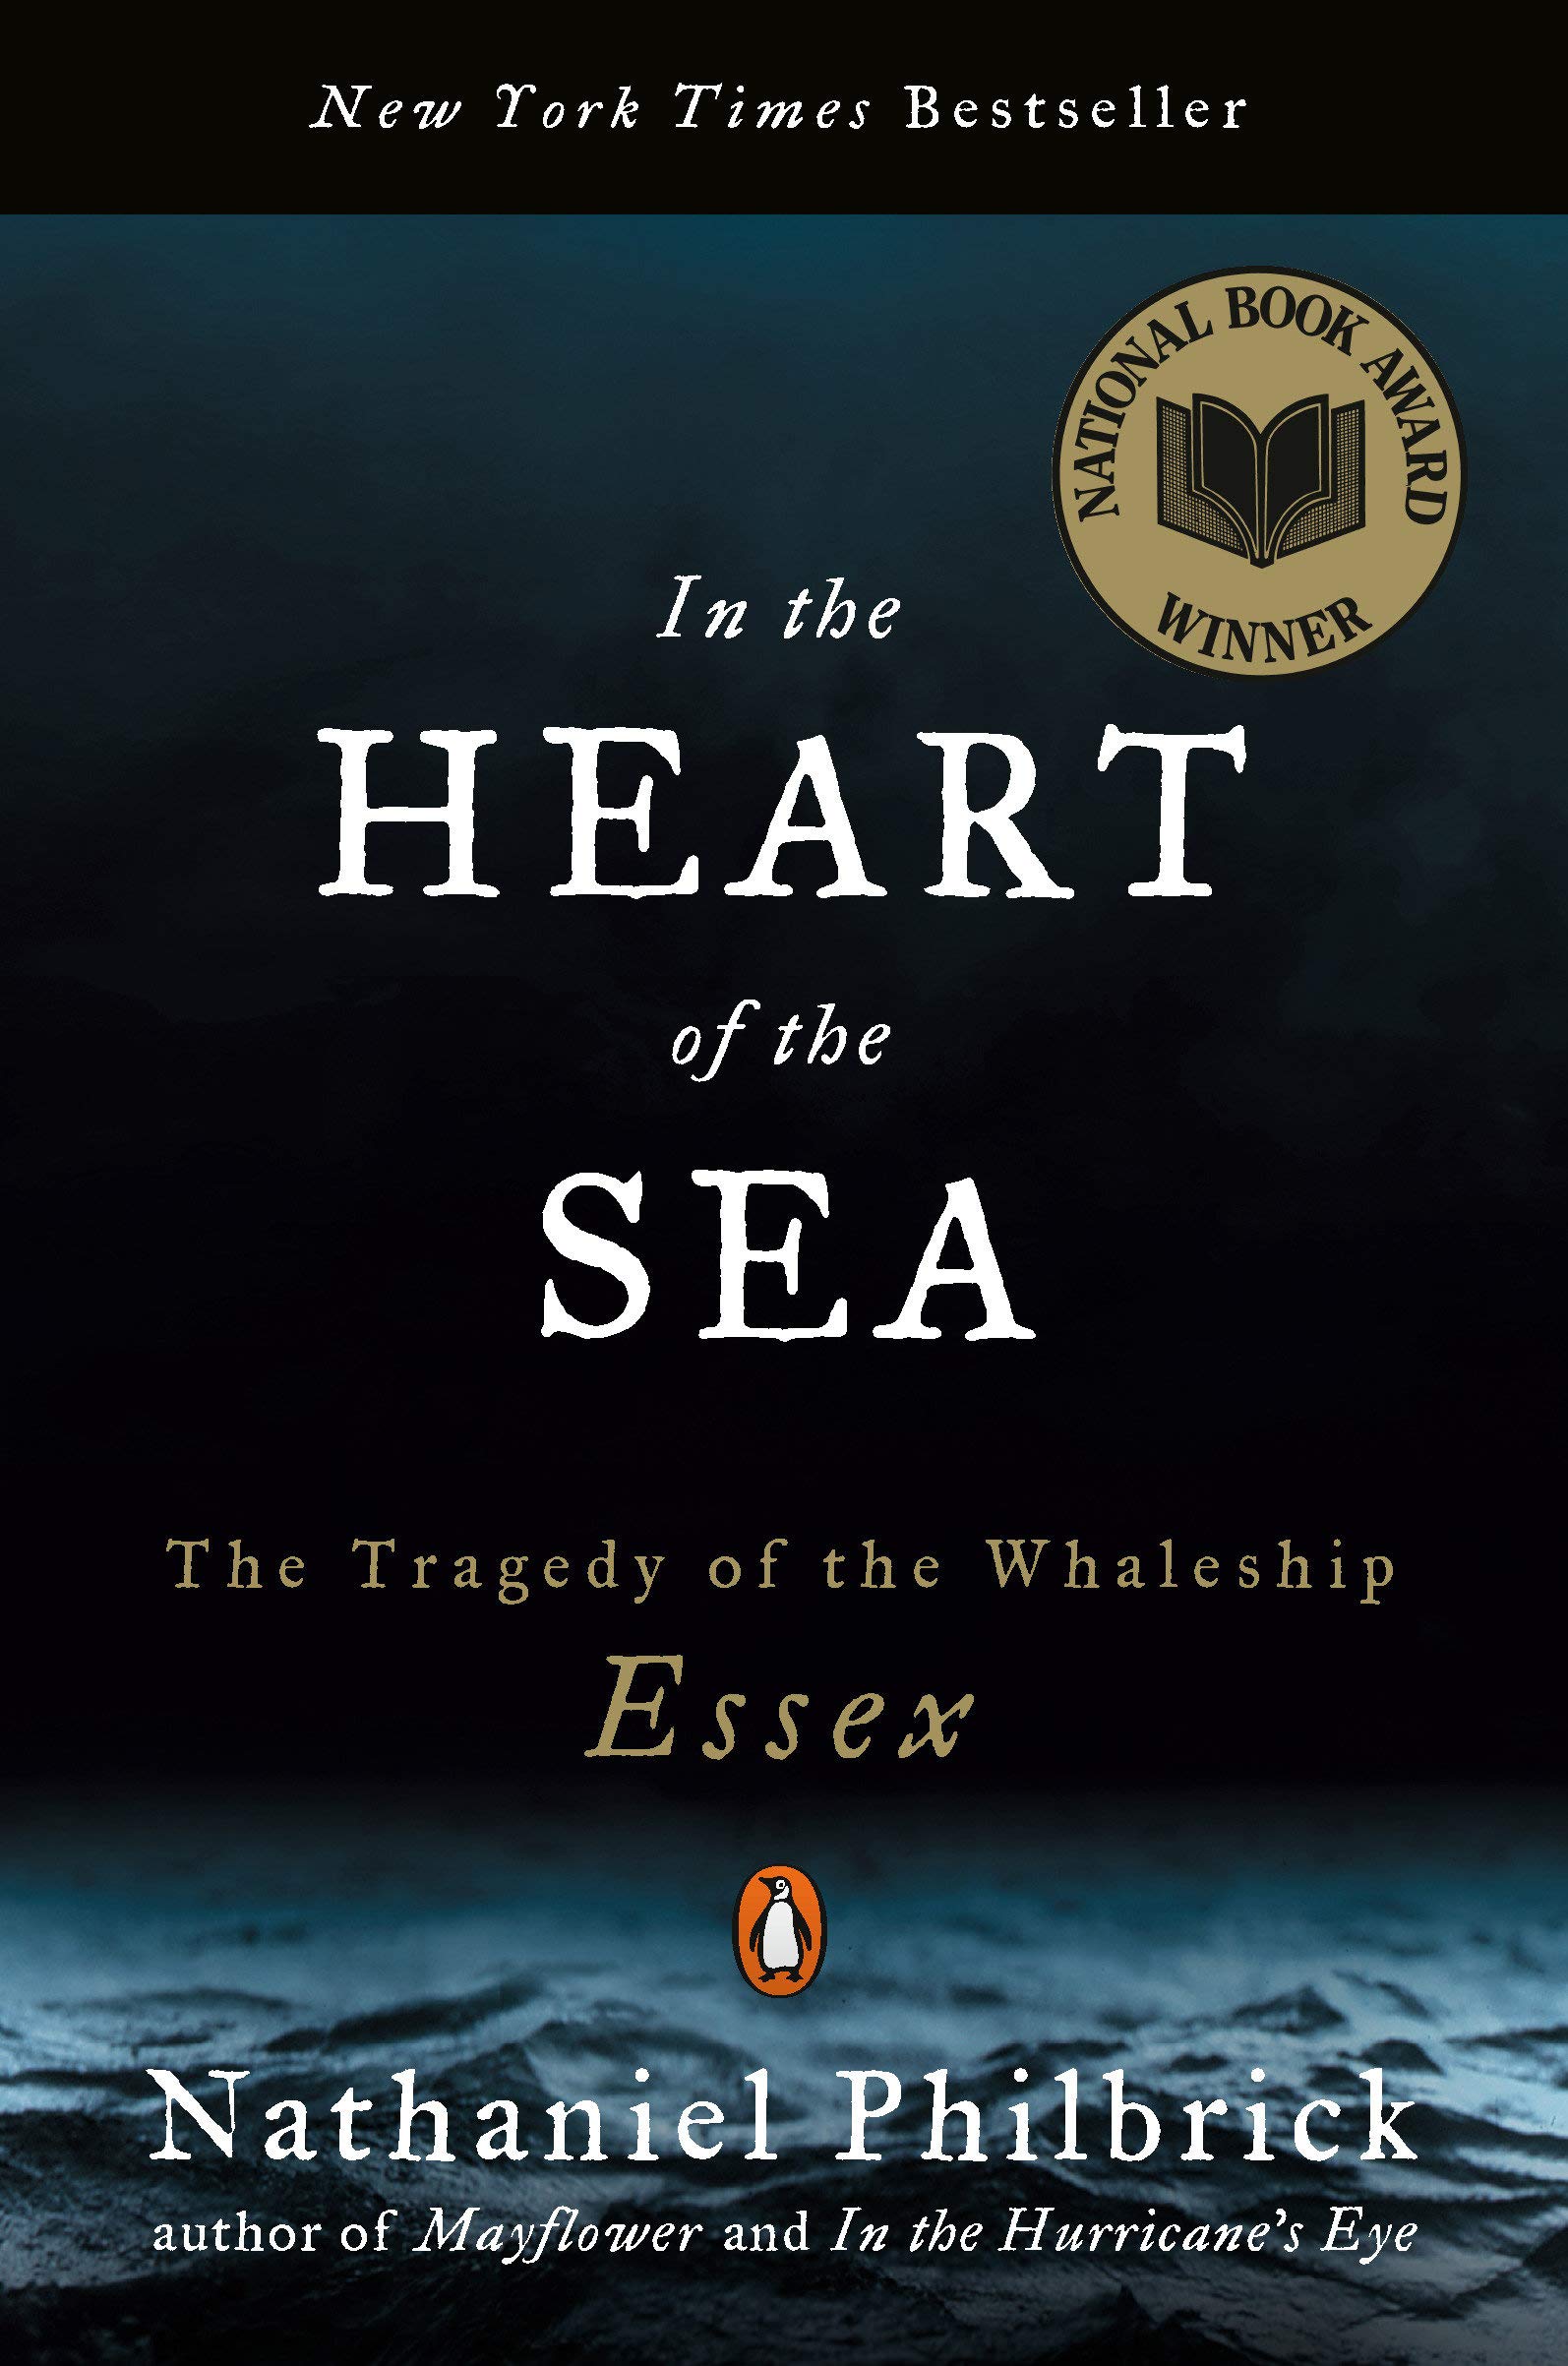 In the Heart of the Sea (book cover)